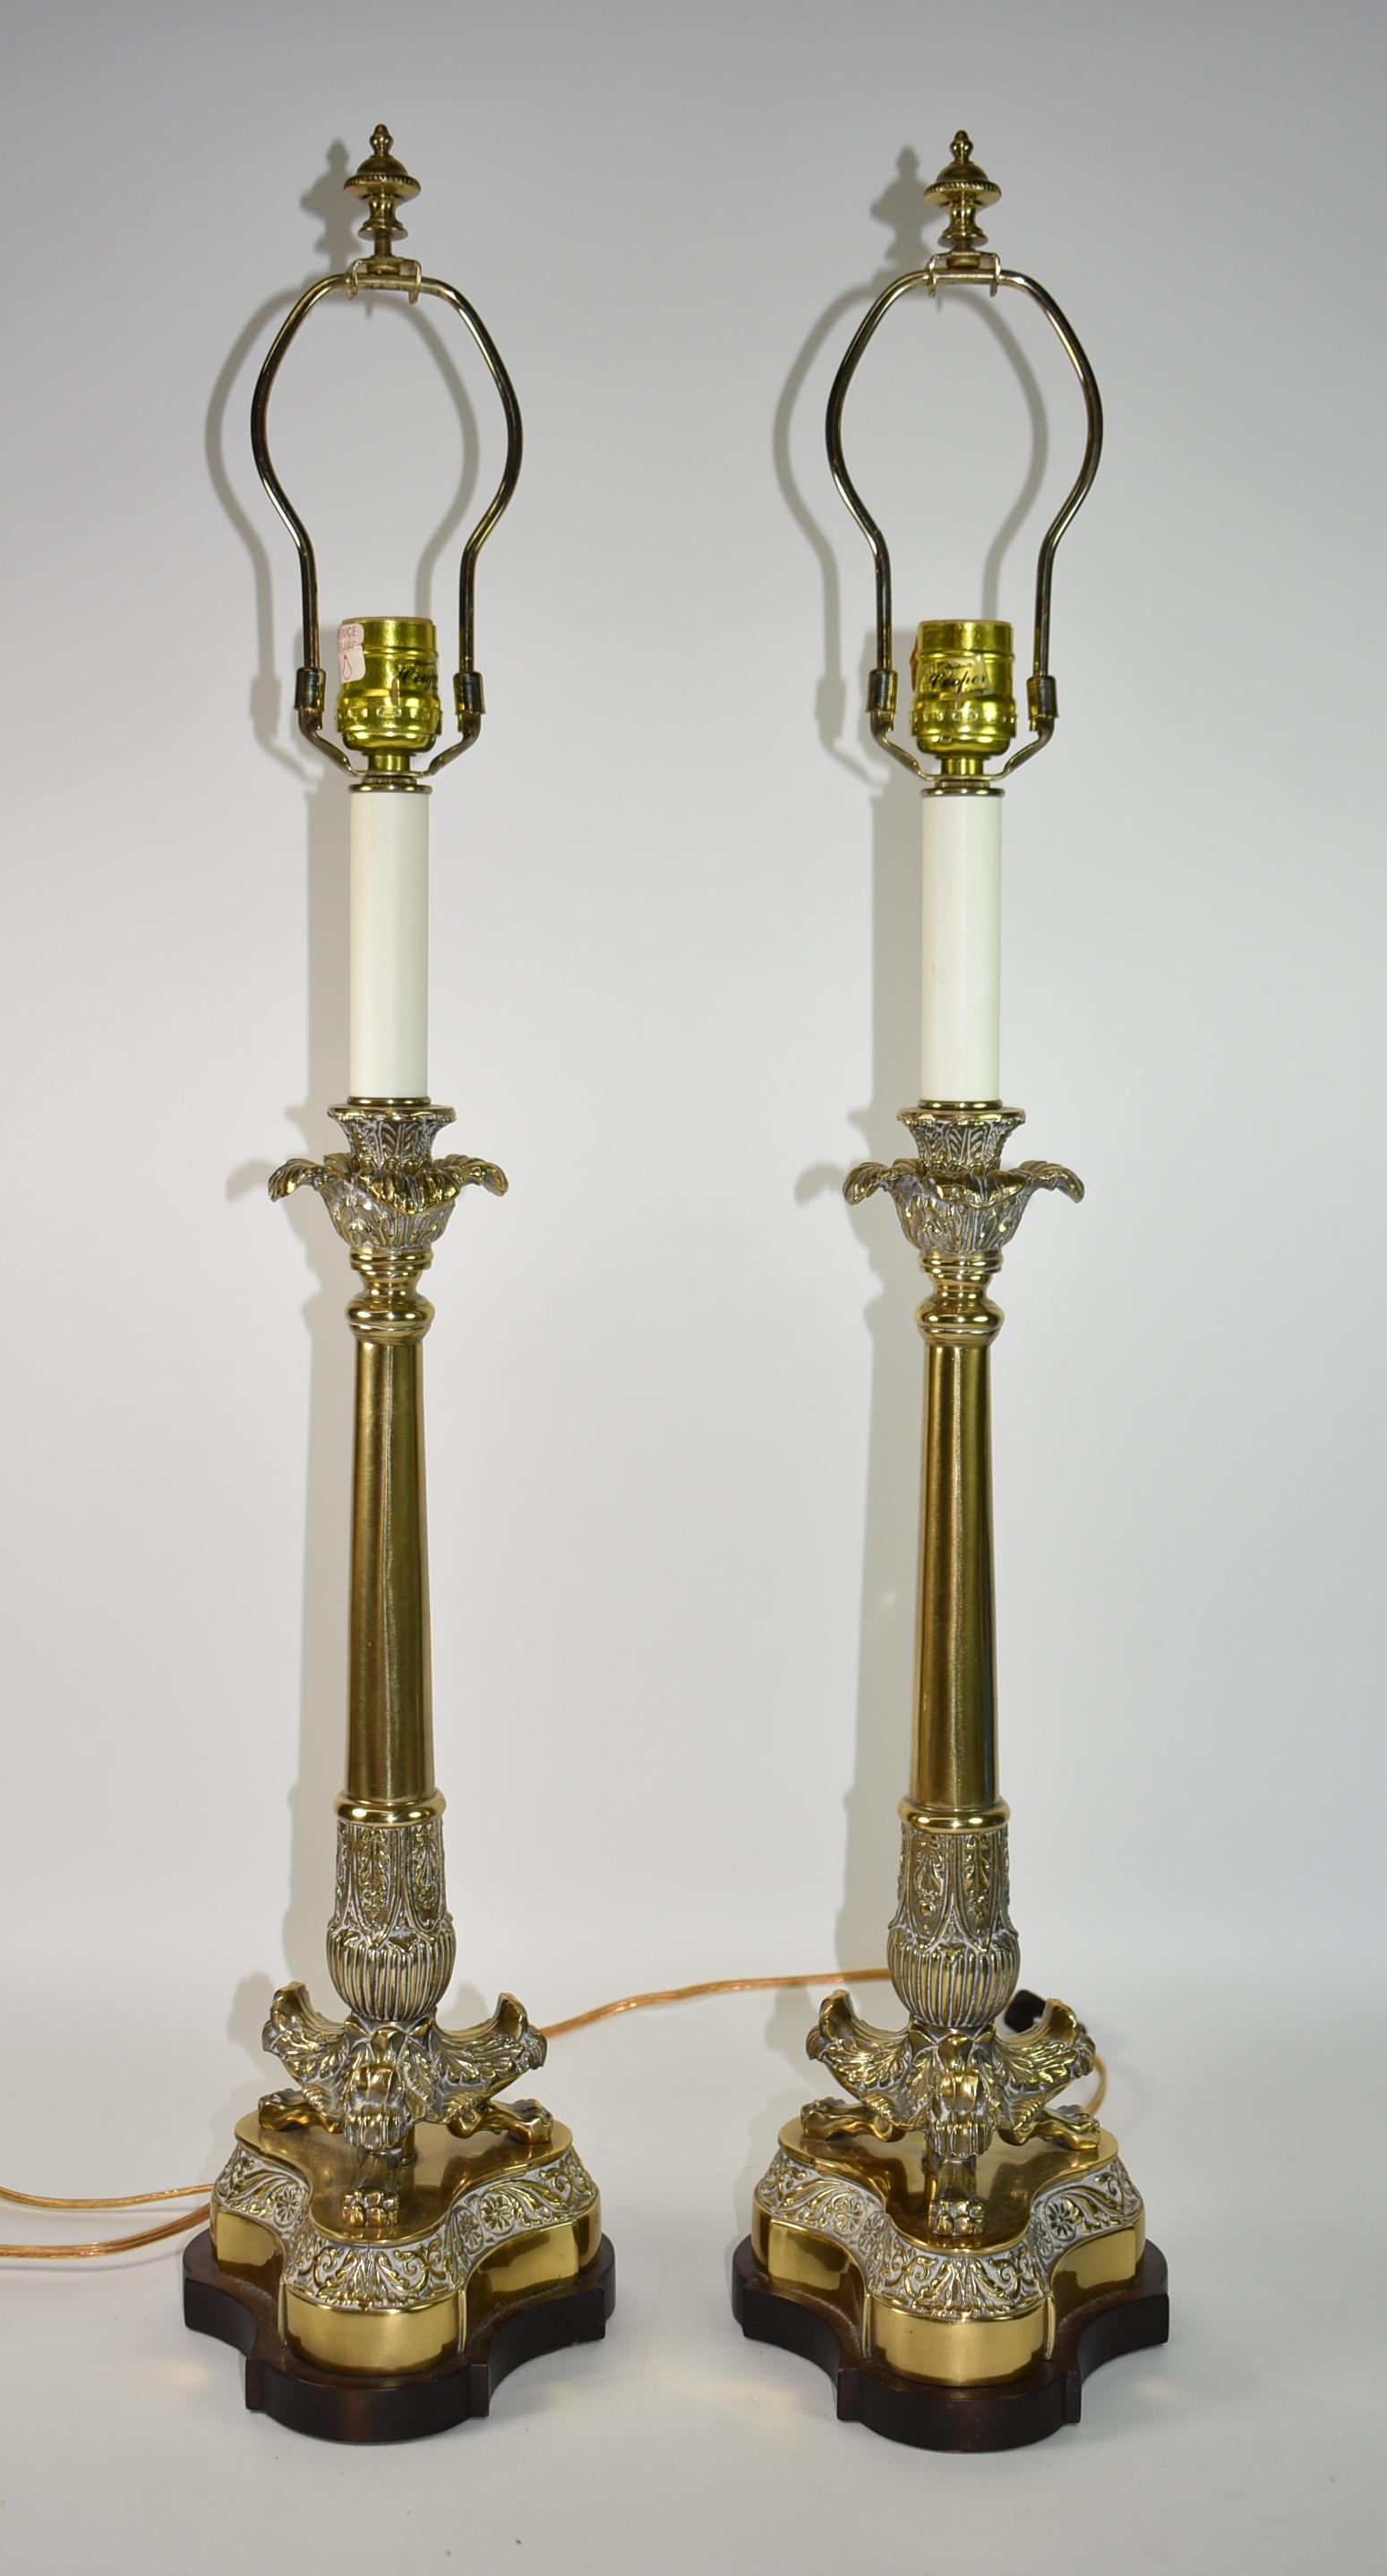 Pair of neoclassical style table/buffet lamps by Frederick Cooper. Heavy brass bases mounted on a wood base. On cord switch. Fringed shades are 14